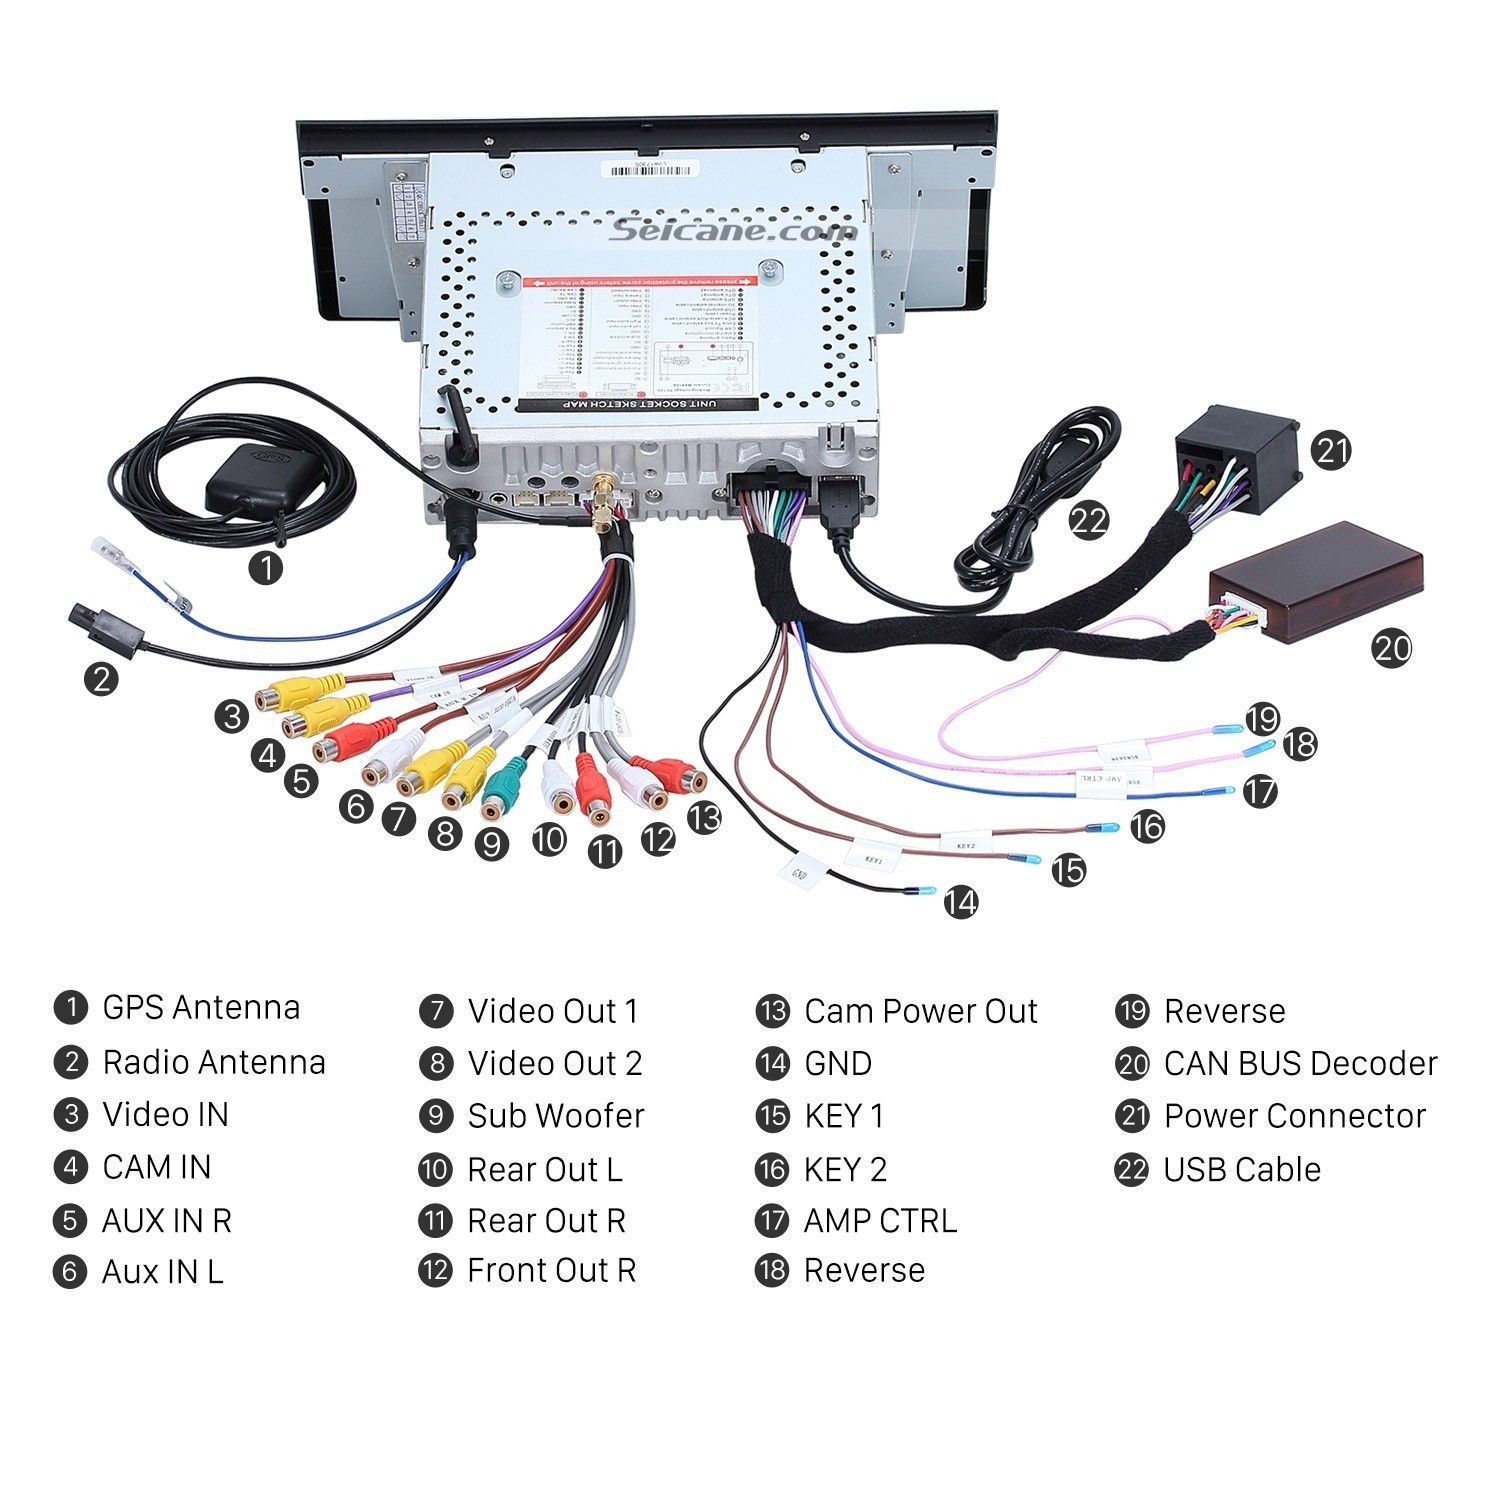 Wiring Diagram In Automobile New Diagram Car Best Car Parts and Diagrams Insignia Se 2 0d